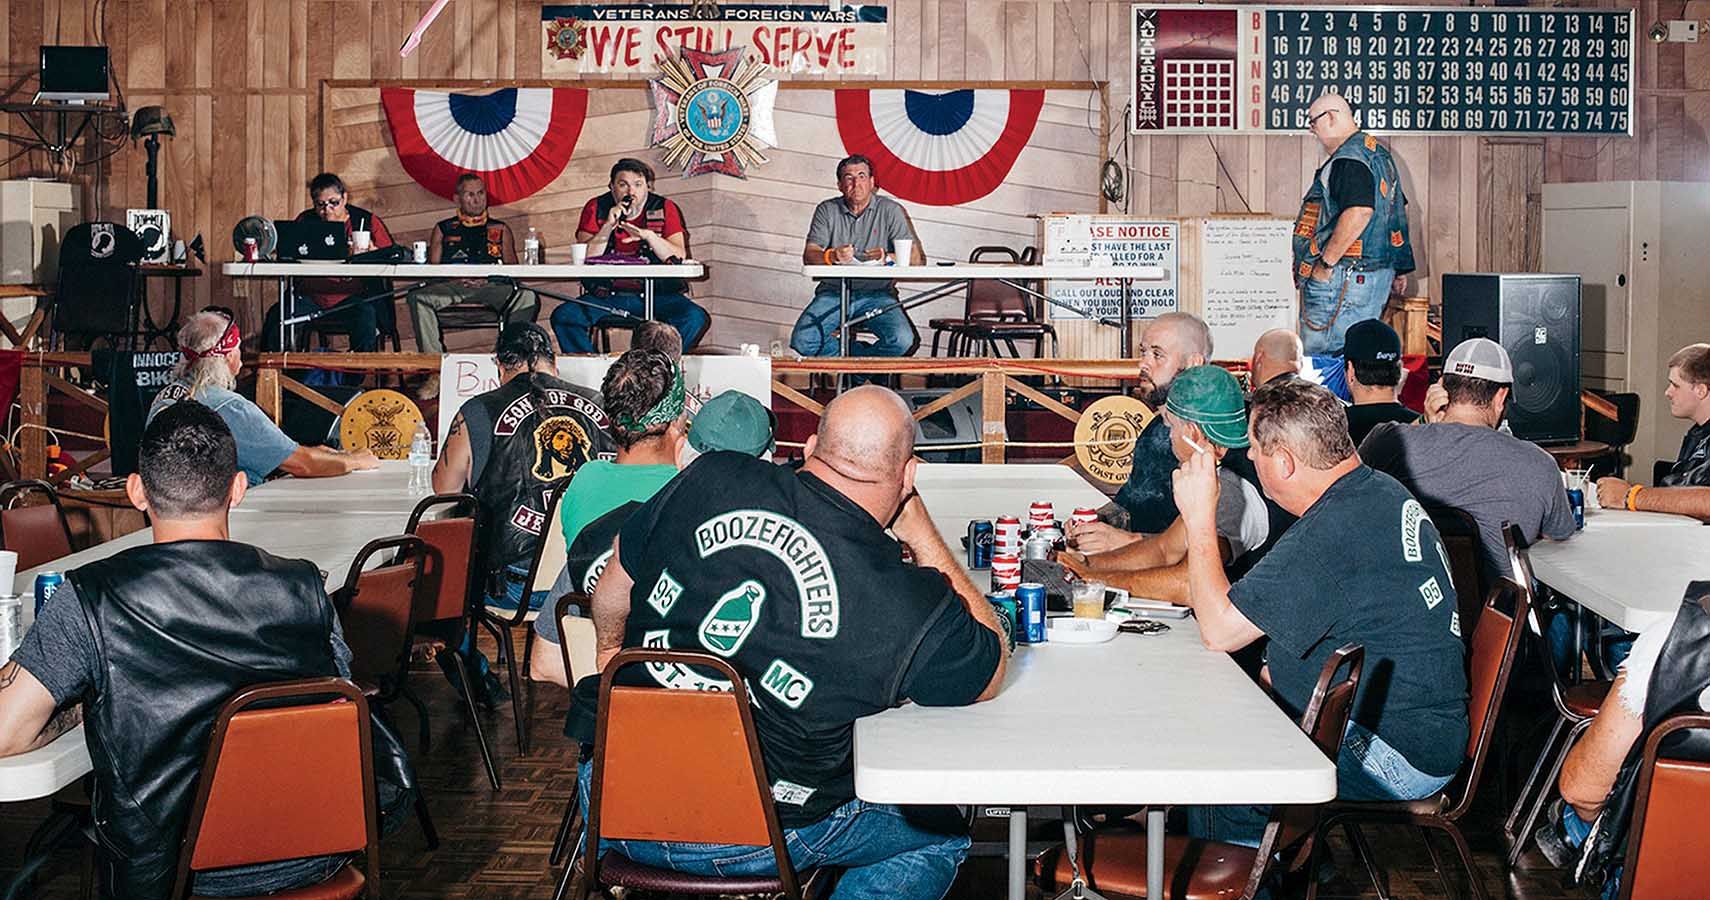 All The Motorcycle Club's Meetings Also Have A Strict Code Of Conduct